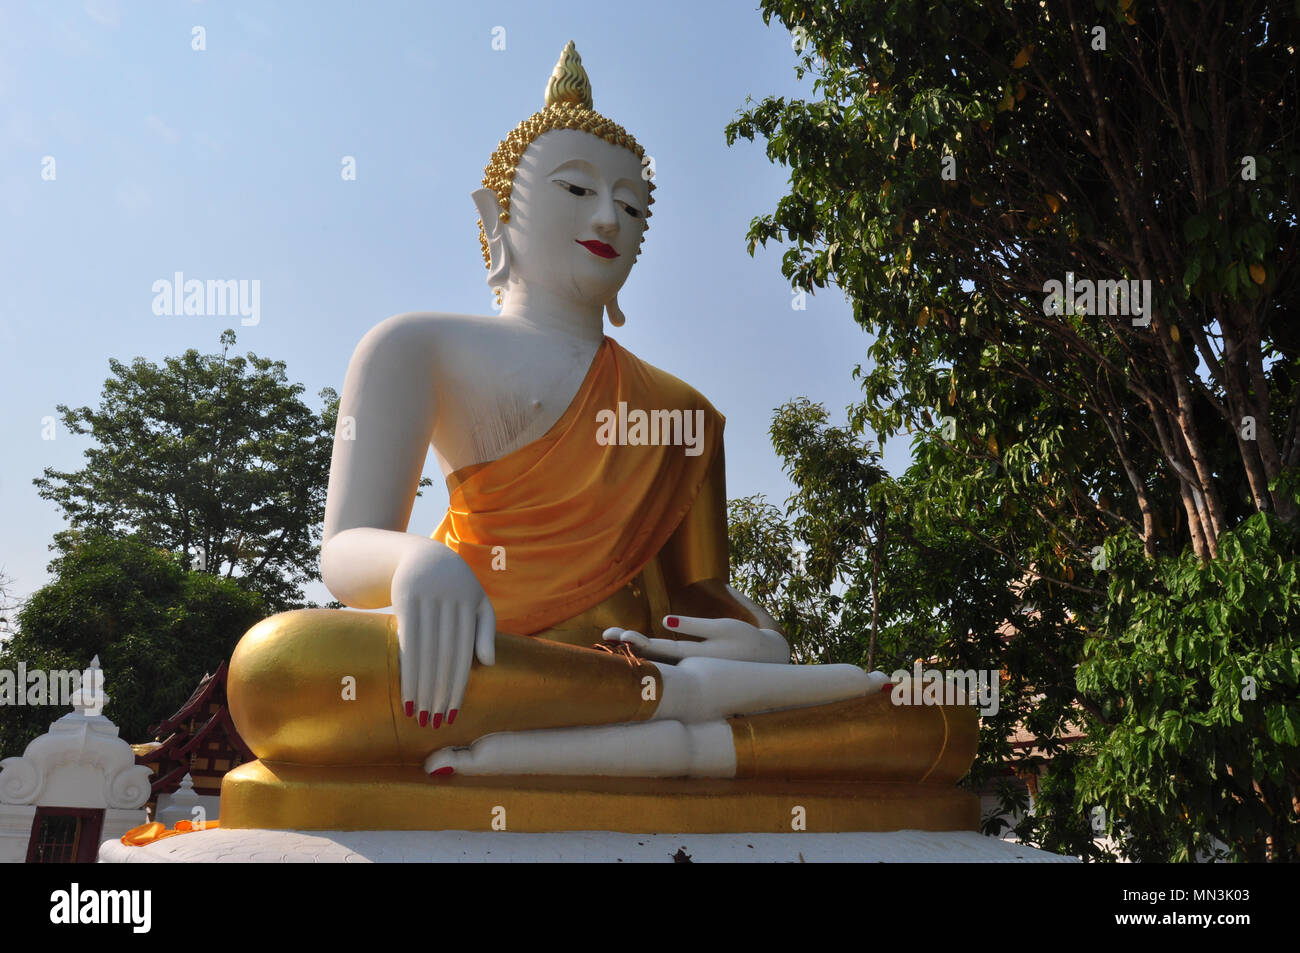 Earth Touching Buddha High Resolution Stock Photography and Images 